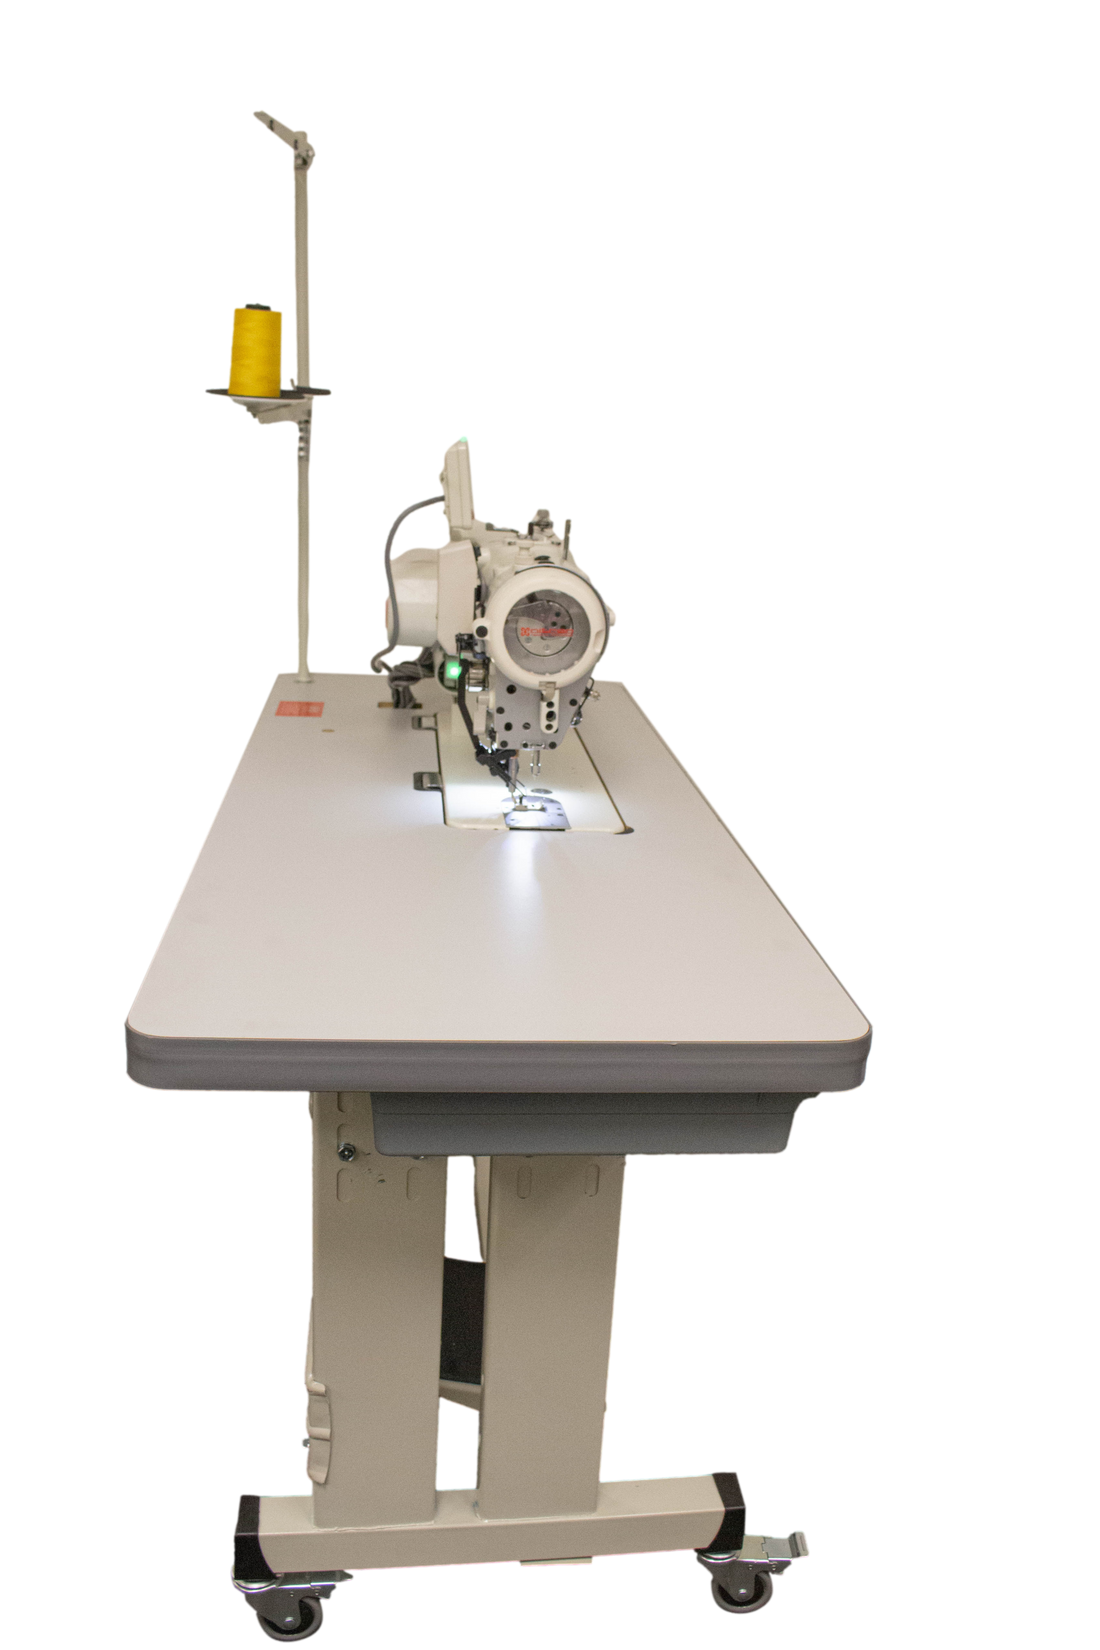 NT-2290A-SR-7/P Multiple designs Computer-Controlled High Speed Single Needle Direct-Drive Zig-Zag Sewing Machine